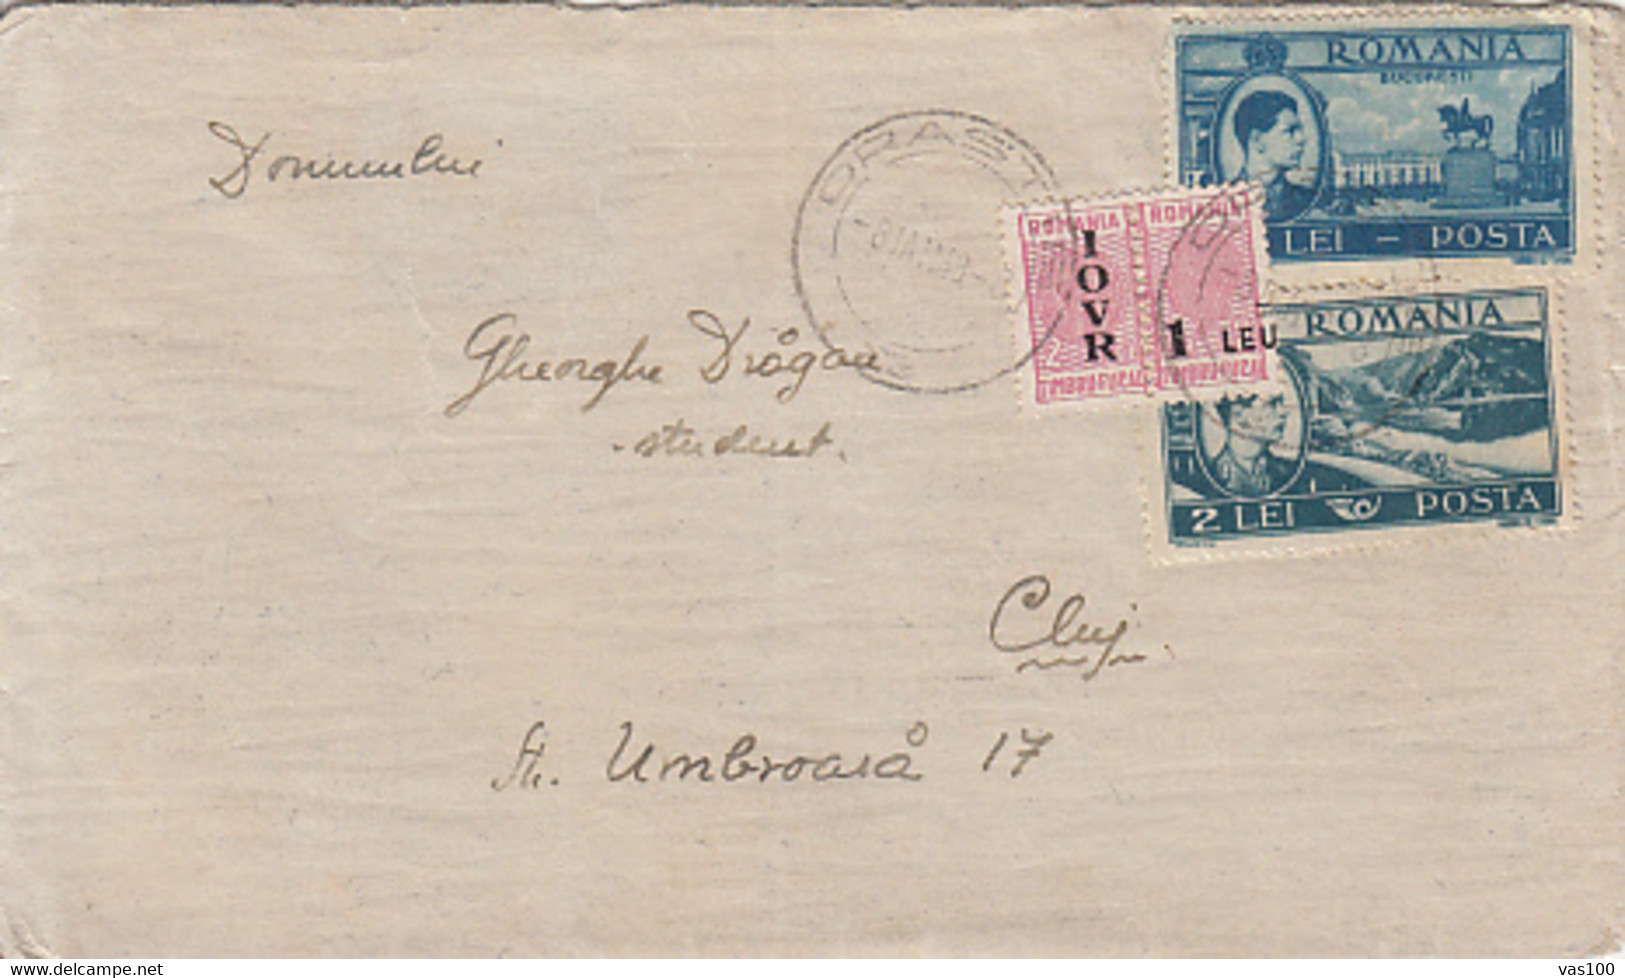 IOVR OVERPRINT REVENUE STAMP, KING MICHAEL, DANUBE, SHIP, BUCHAREST STATUE STAMPS ON COVER, 1948, ROMANIA - Fiscali